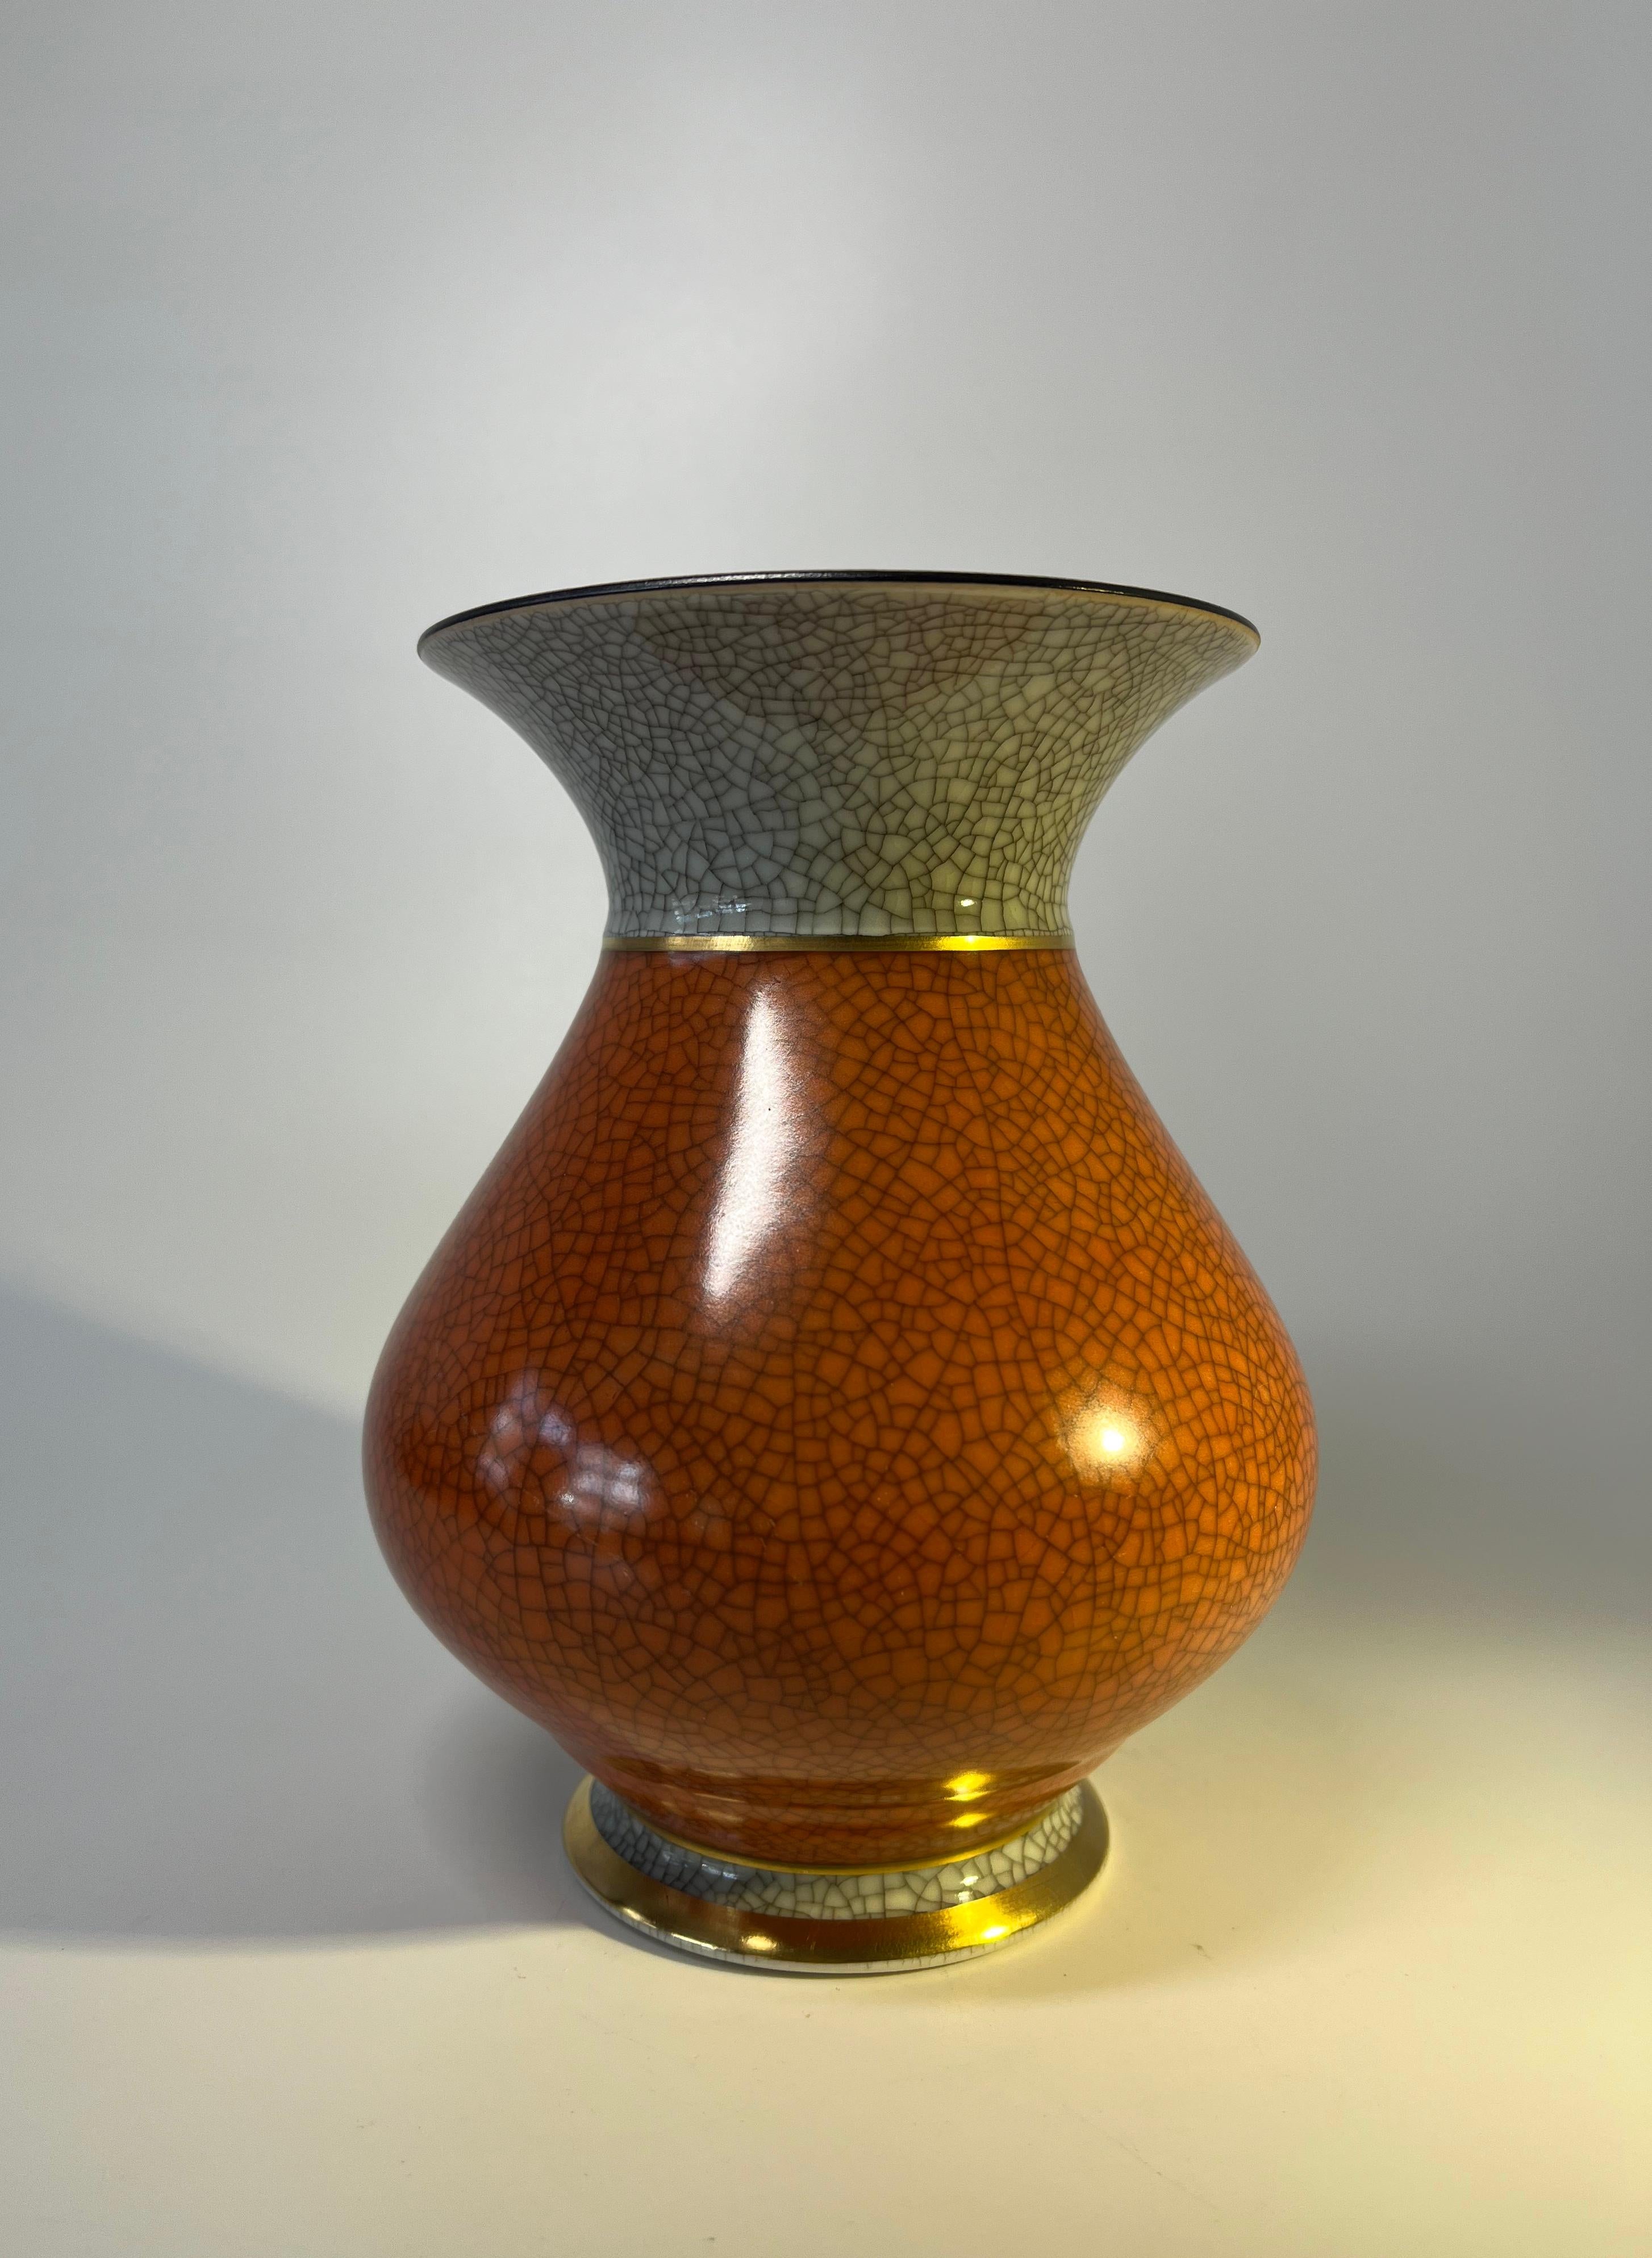 Royal Copenhagen Terracotta Crackle Glazed Vase, Gilded Banding Decoration #3060 In Excellent Condition For Sale In Rothley, Leicestershire